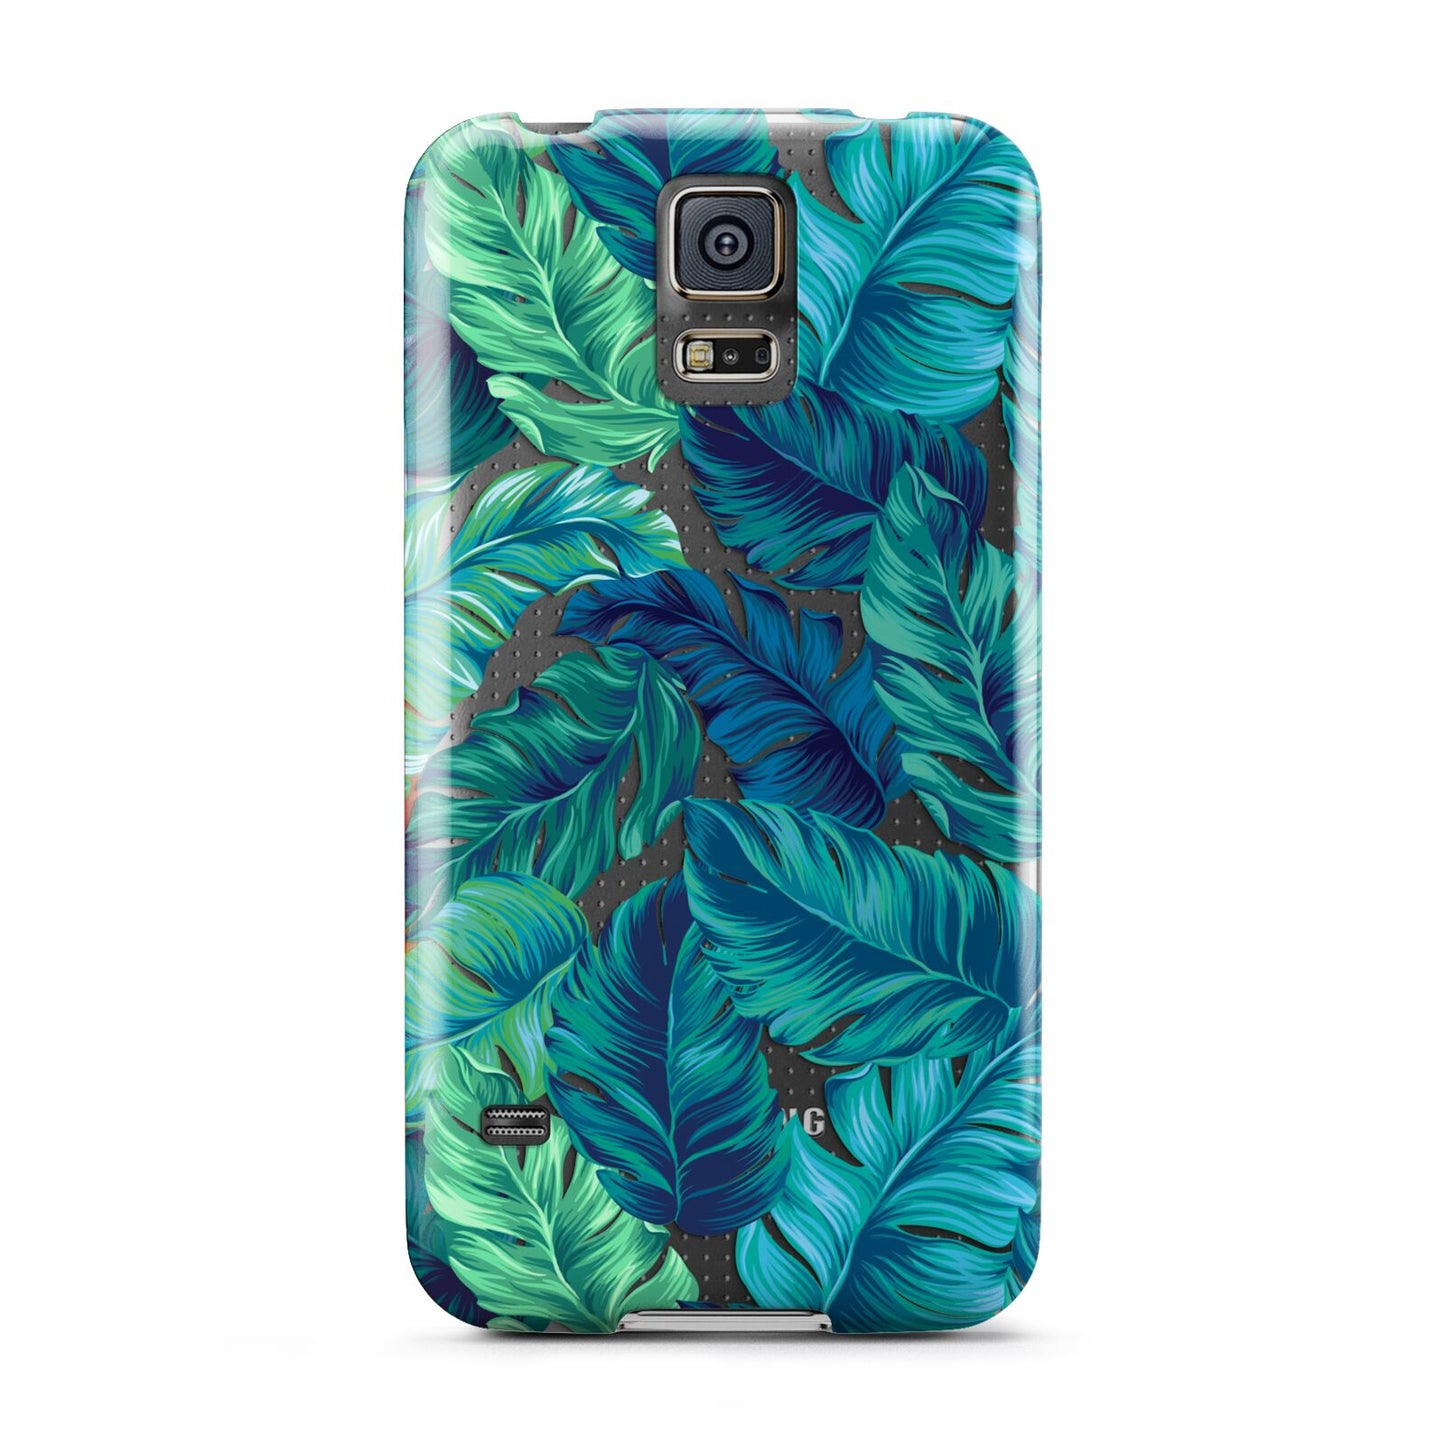 Tropical Leaves Samsung Galaxy S5 Case